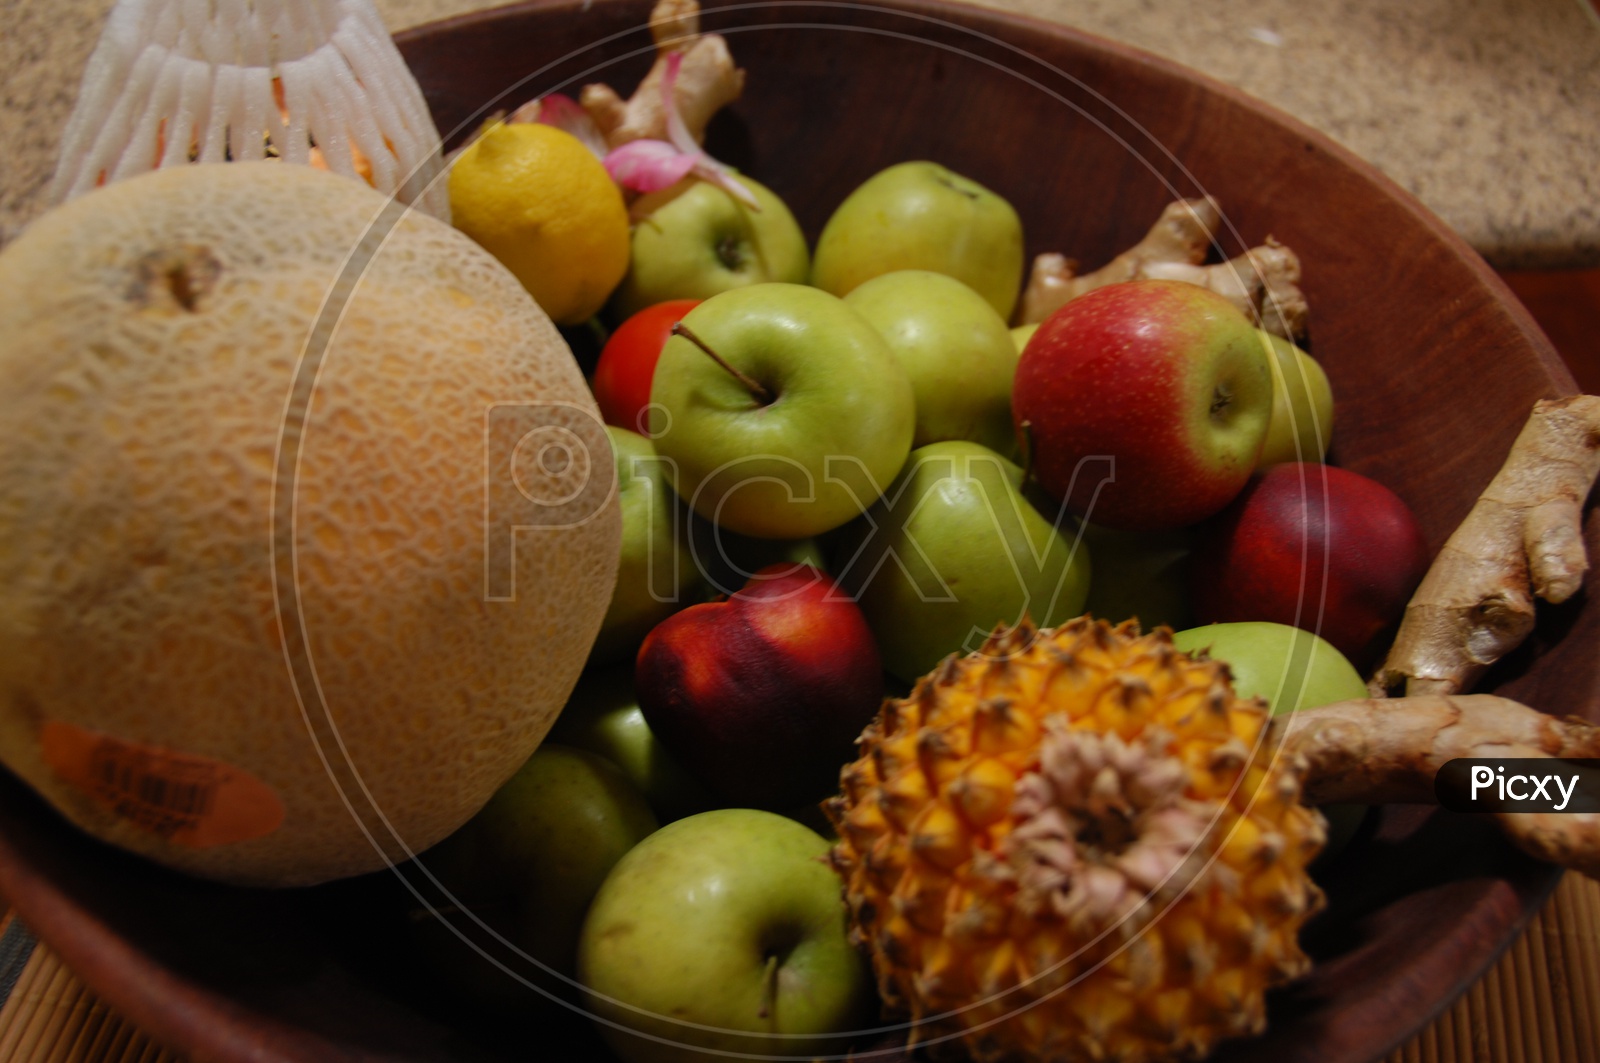 Photograph of Apple fruits in a bowl